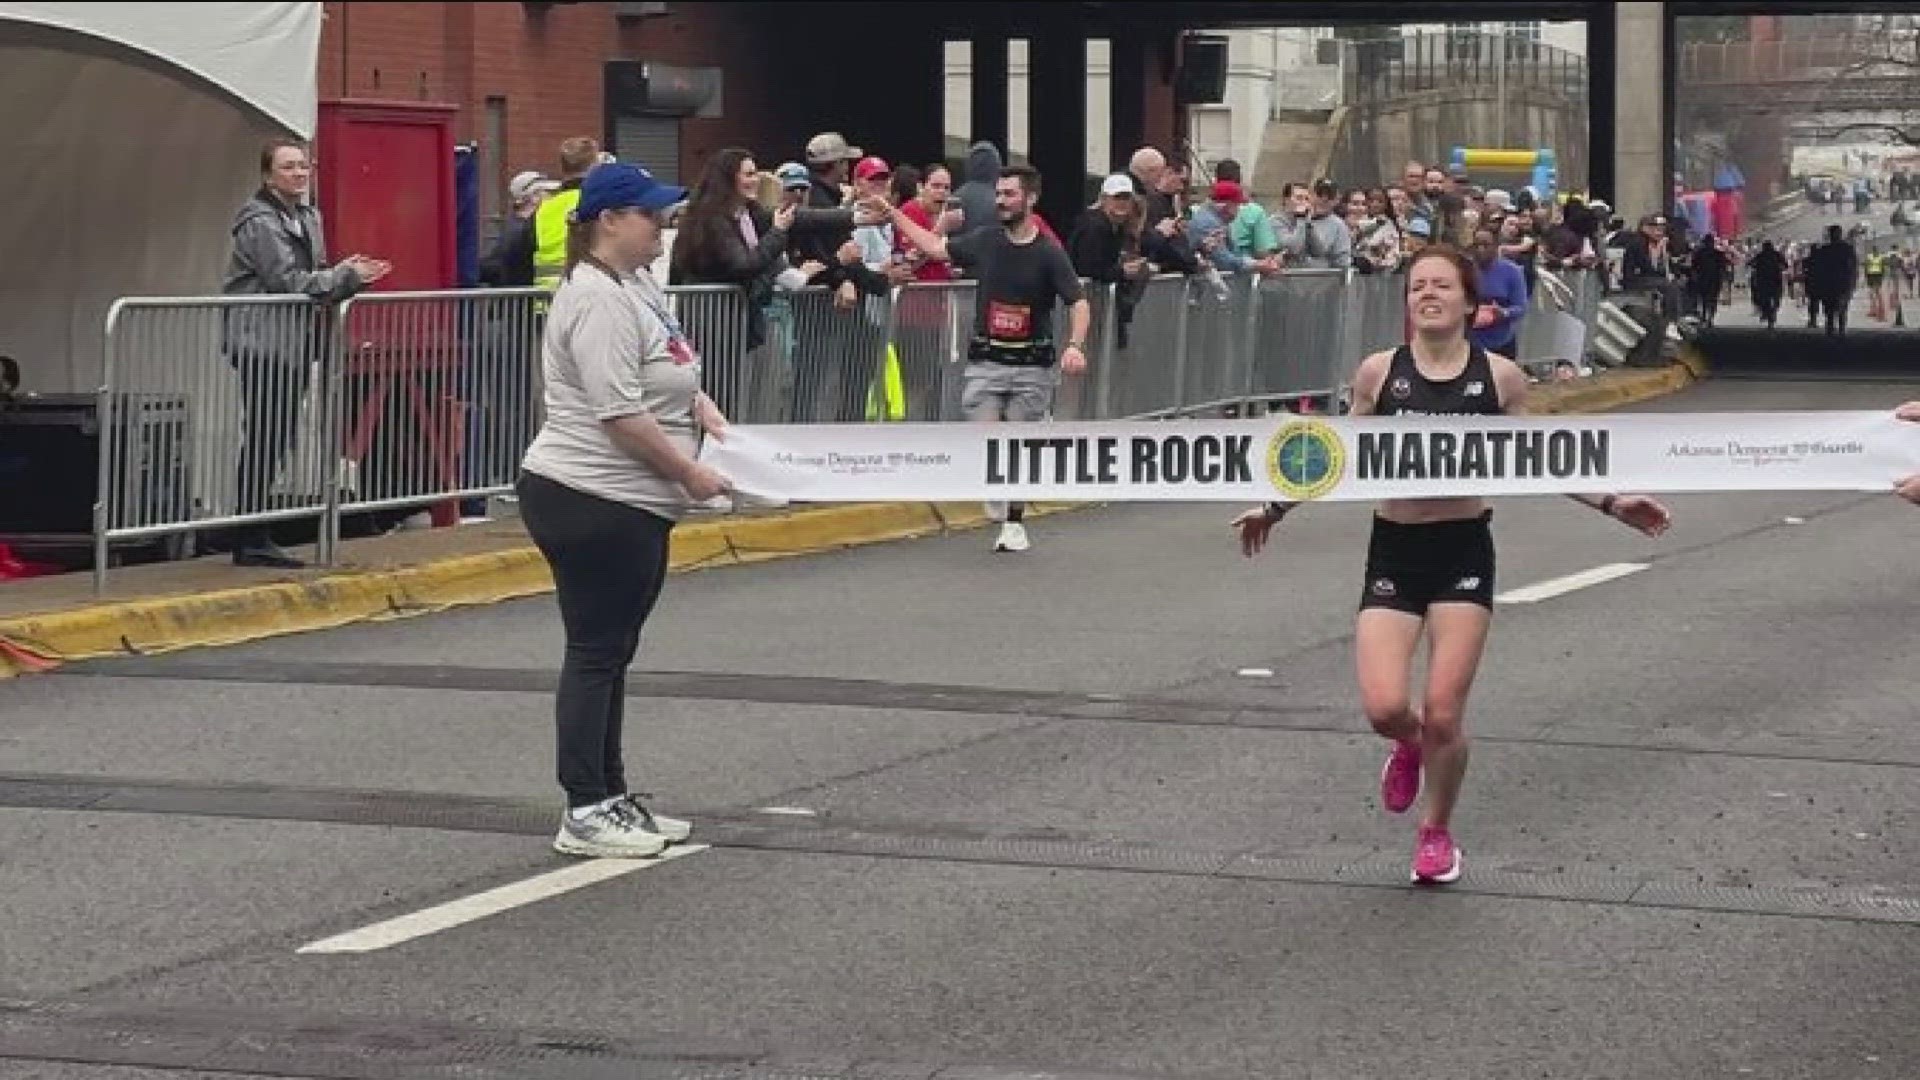 Abigayle Money trained for over 4 months to finish first in the Little Rock Marathon with a 2 minute and 51 second time.